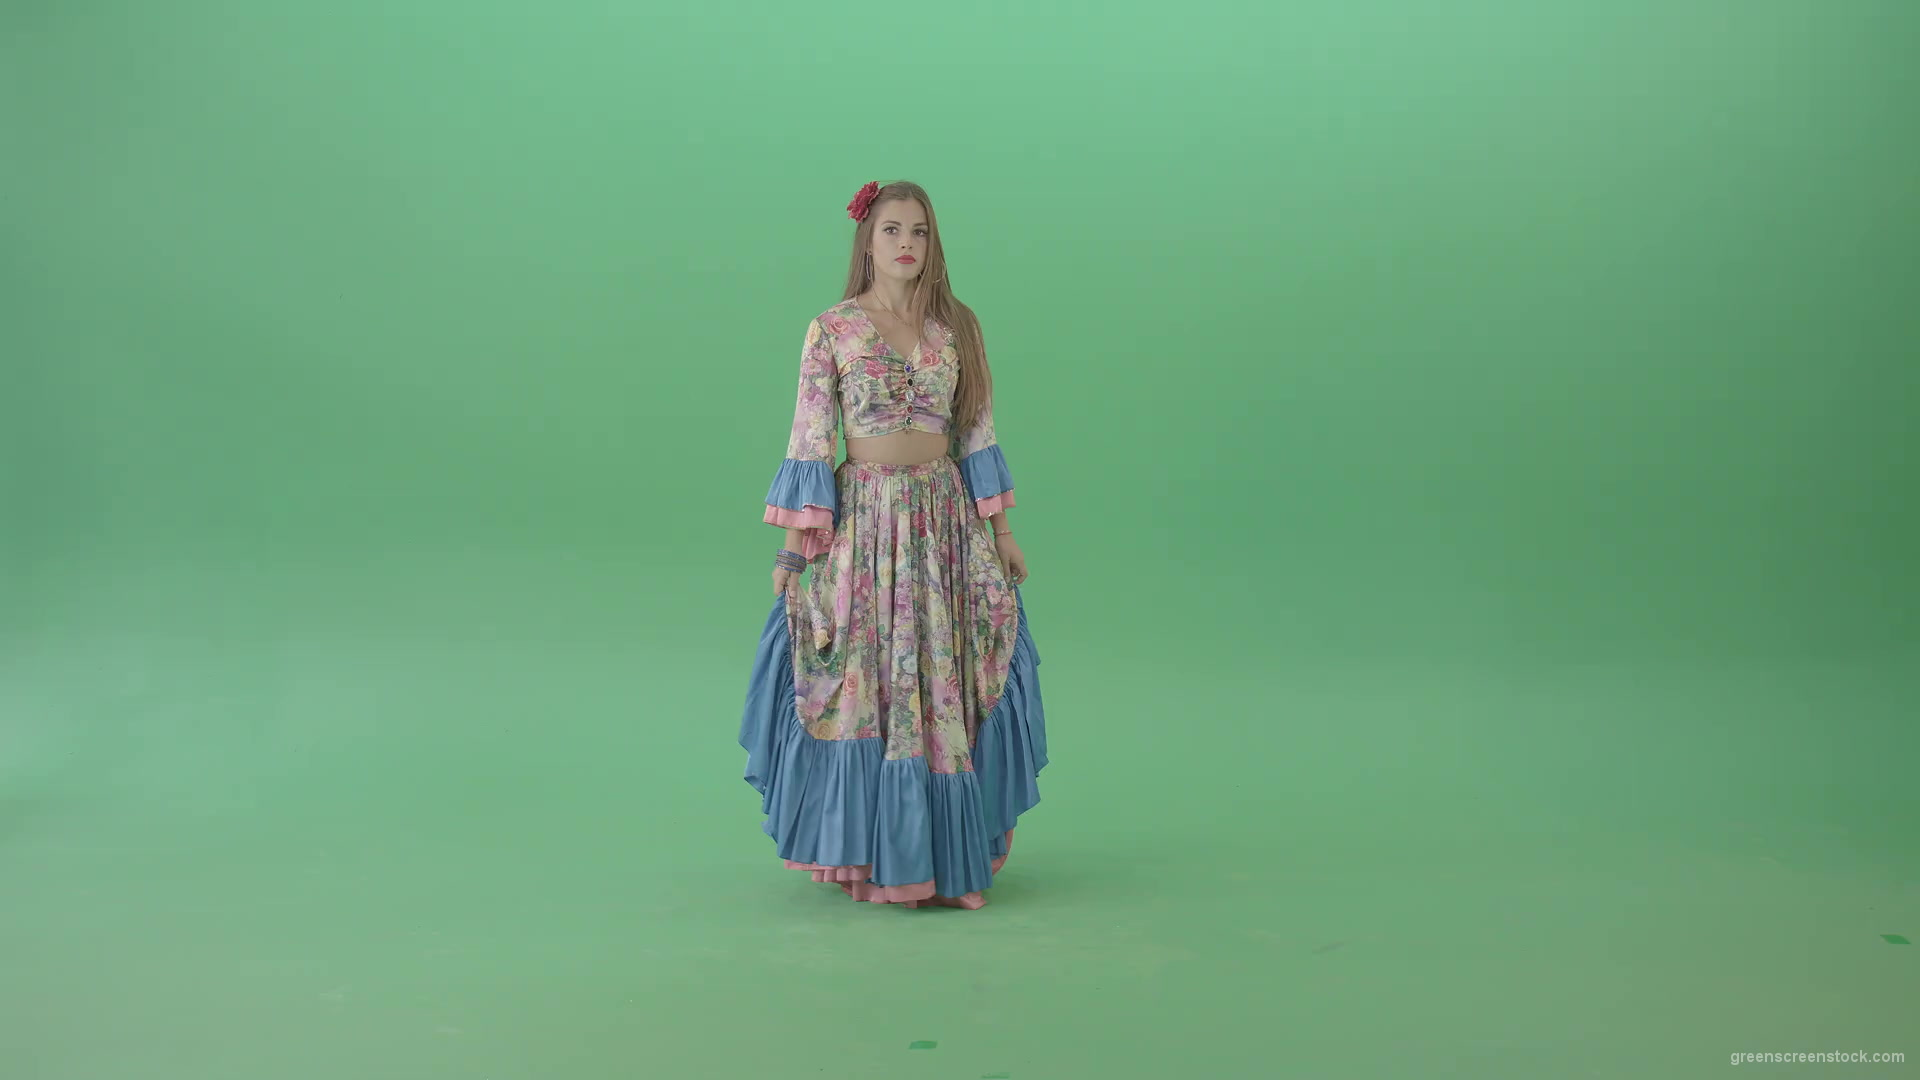 Roma-gipsy-woman-dancing-in-colorful-costume-isolated-on-Green-Screen-4K-Video-Footage-1920_001 Green Screen Stock